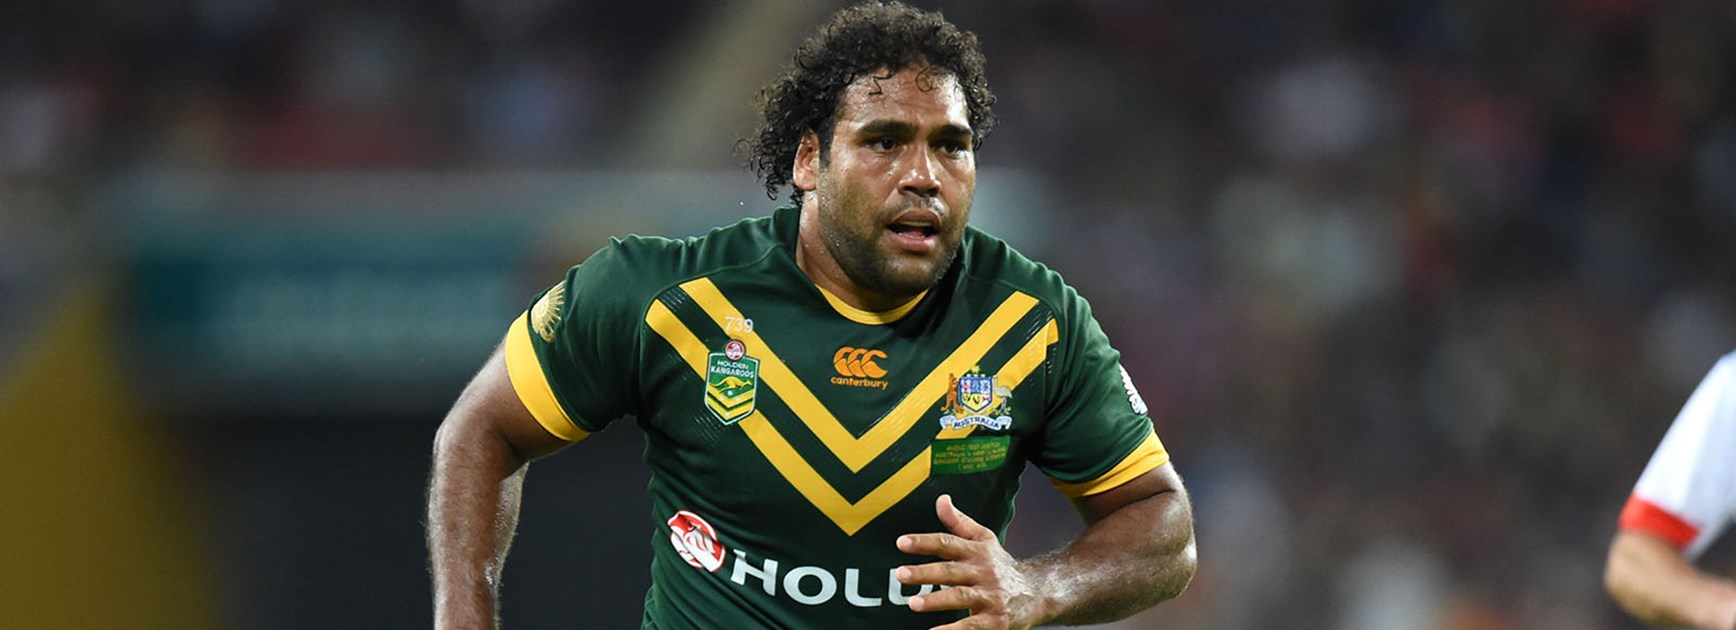 Sam Thaiday will miss the Broncos clash with Penrith after being suspended for a tackle during the Anzac Test.